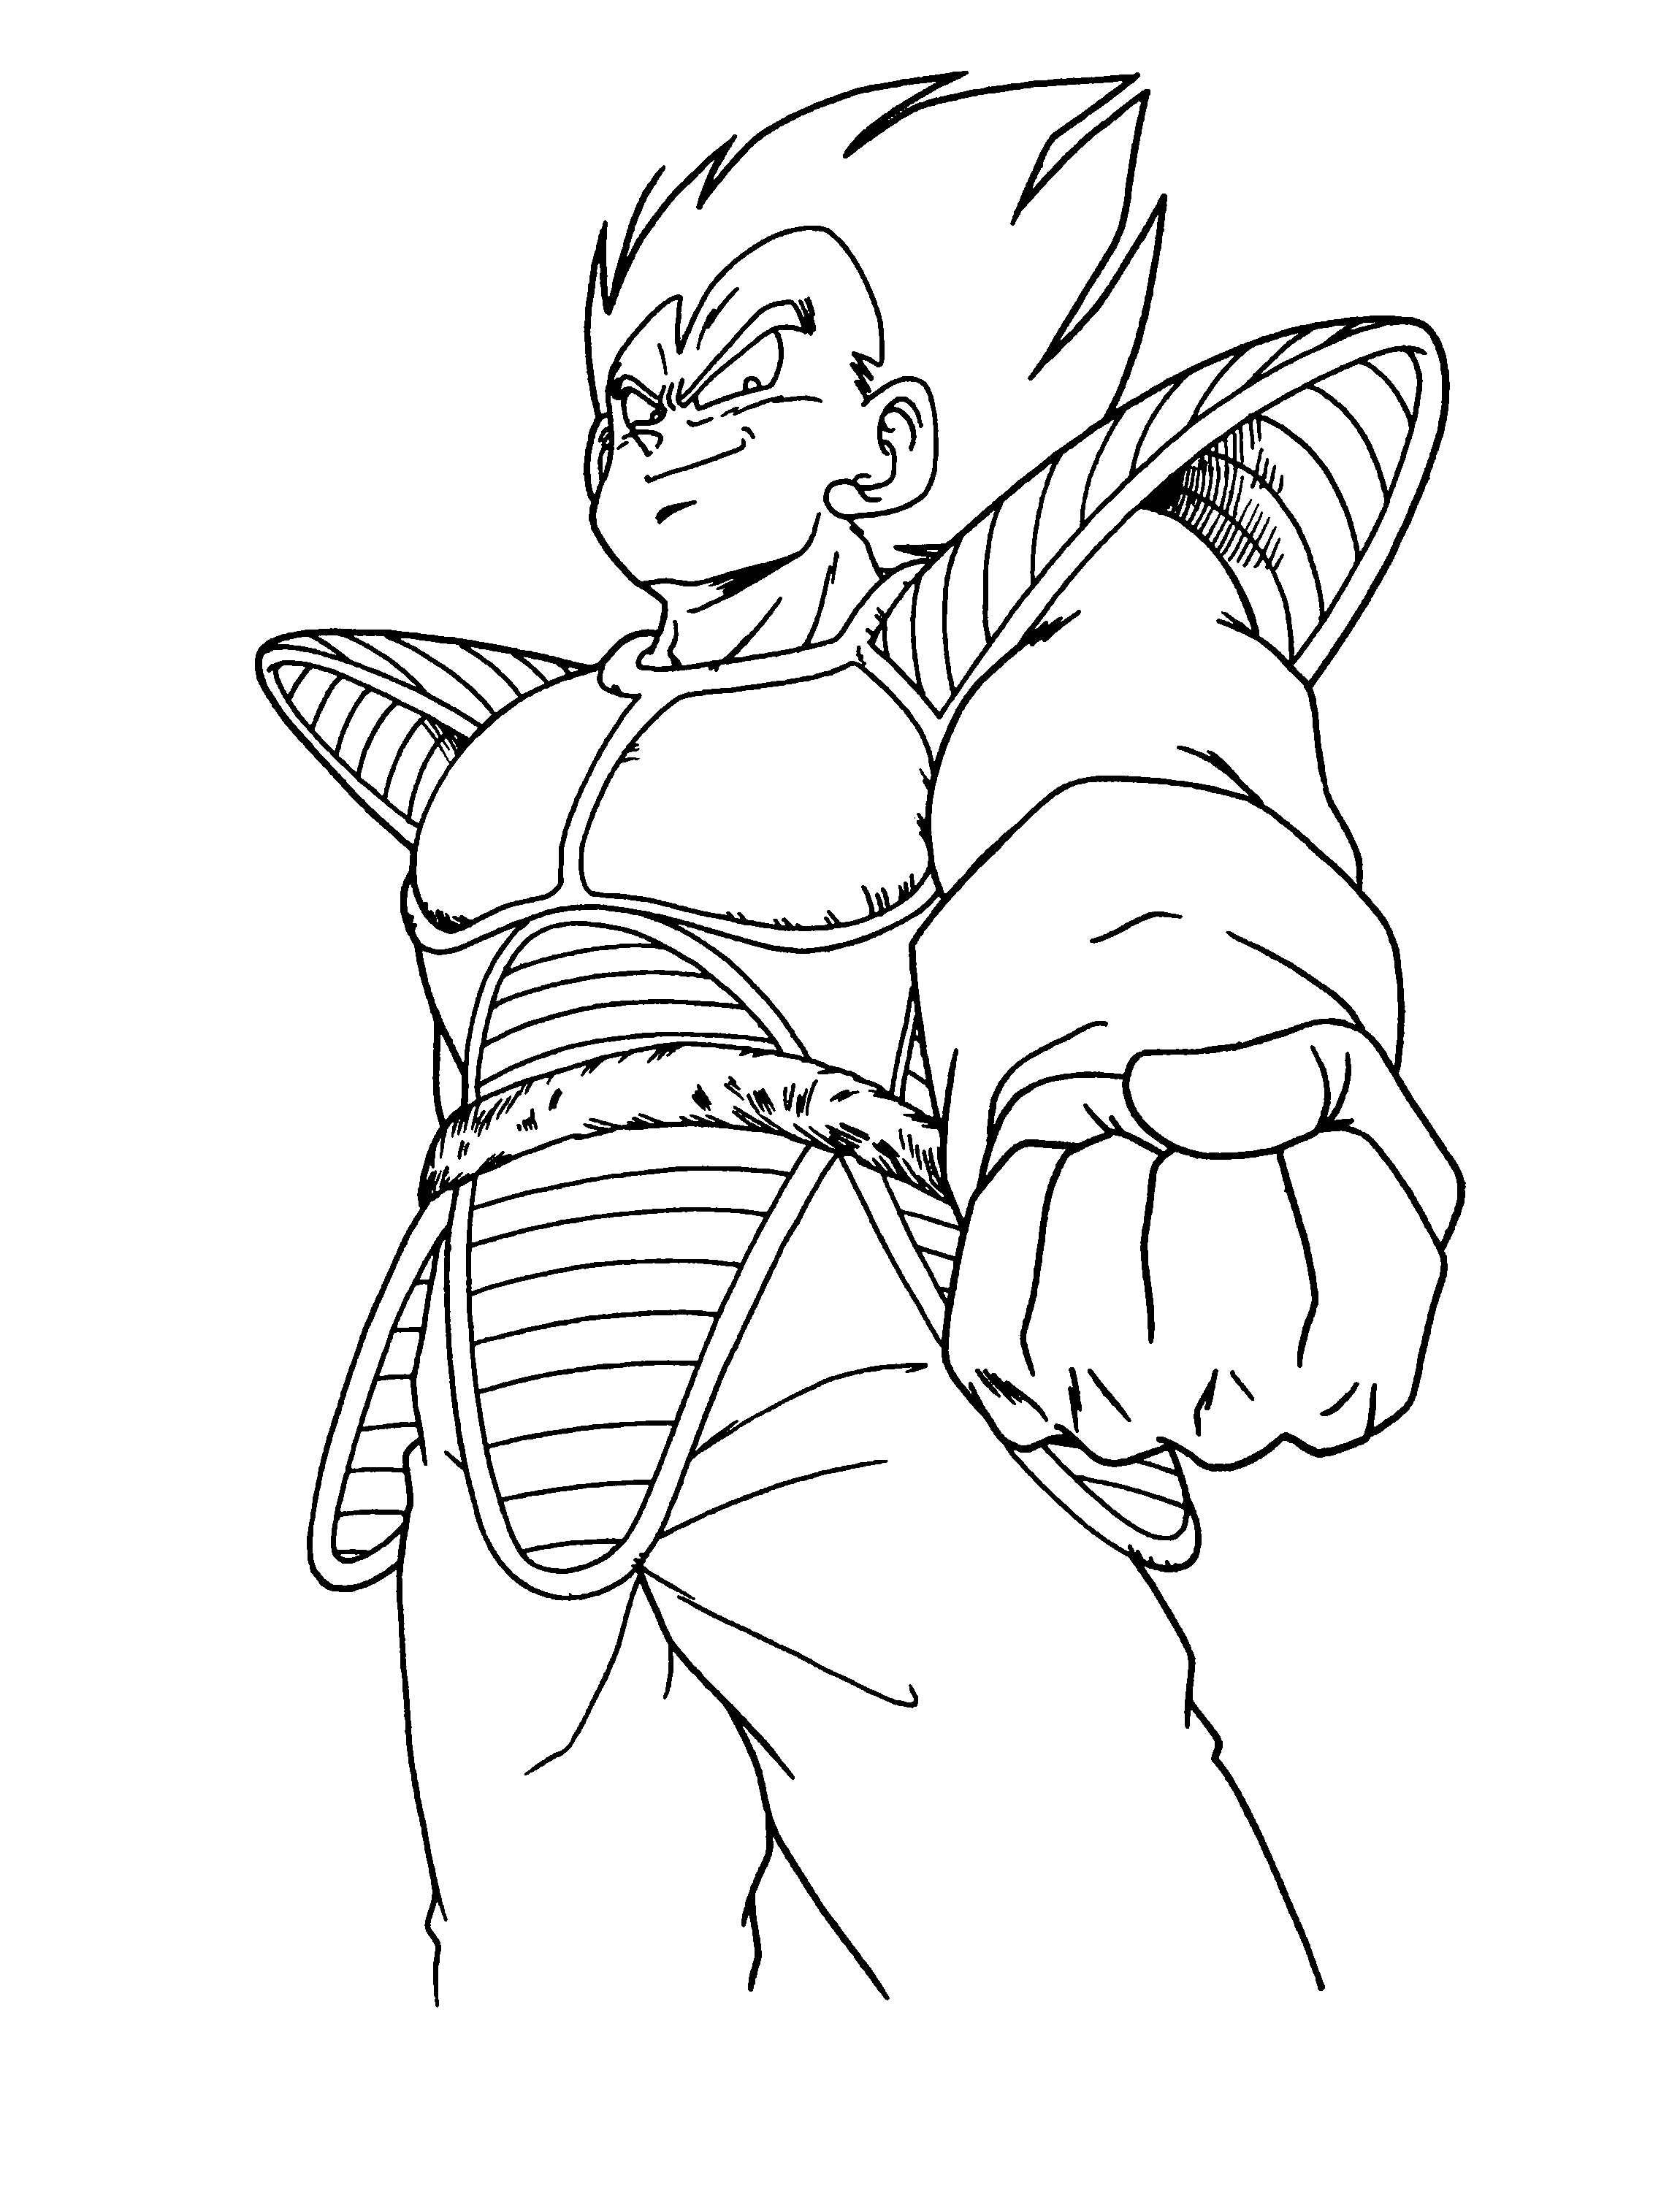 Incredible Dragon Ball Z coloring page to print and color for free : Vegeta